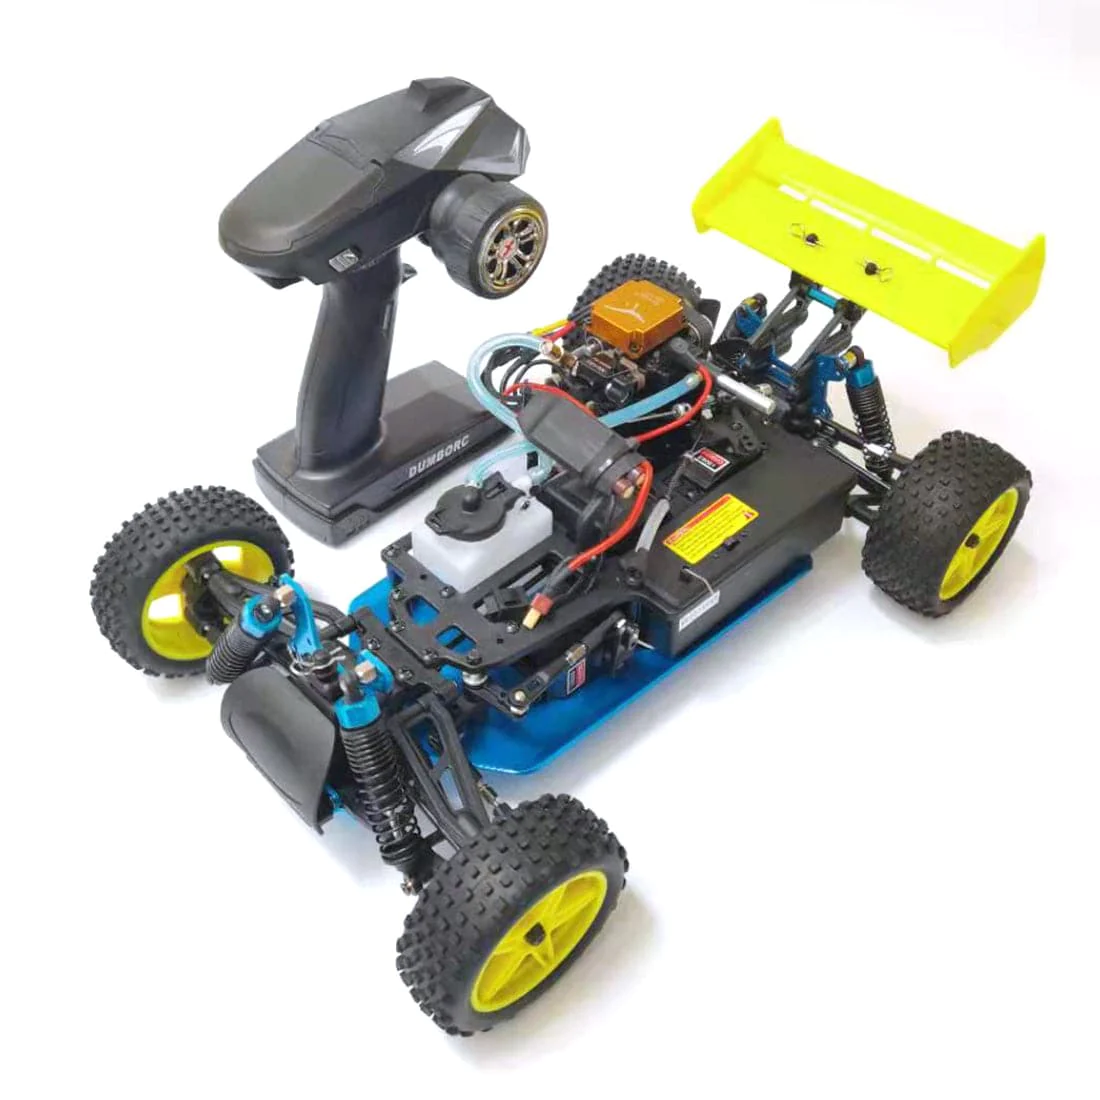 HSP 1/10 2.4G 4WD Nitro Powered Off-road RC Vehicle for TOYAN FS-S100A Nitro Engine RTR 2